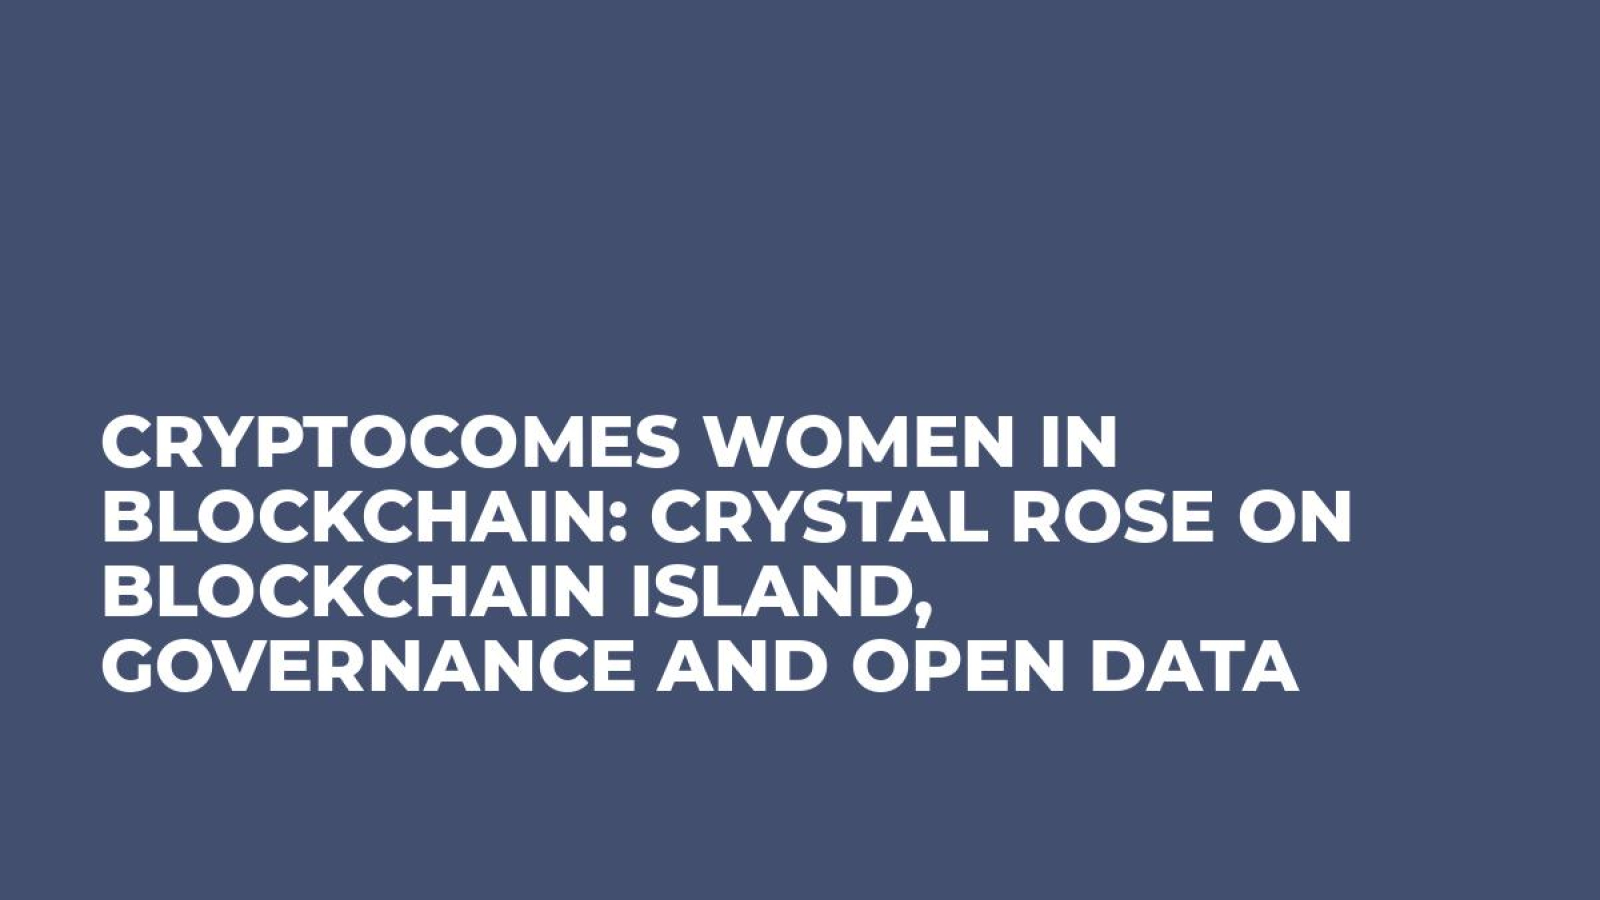 CryptoComes Women in Blockchain: Crystal Rose on Blockchain Island, Governance and Open Data